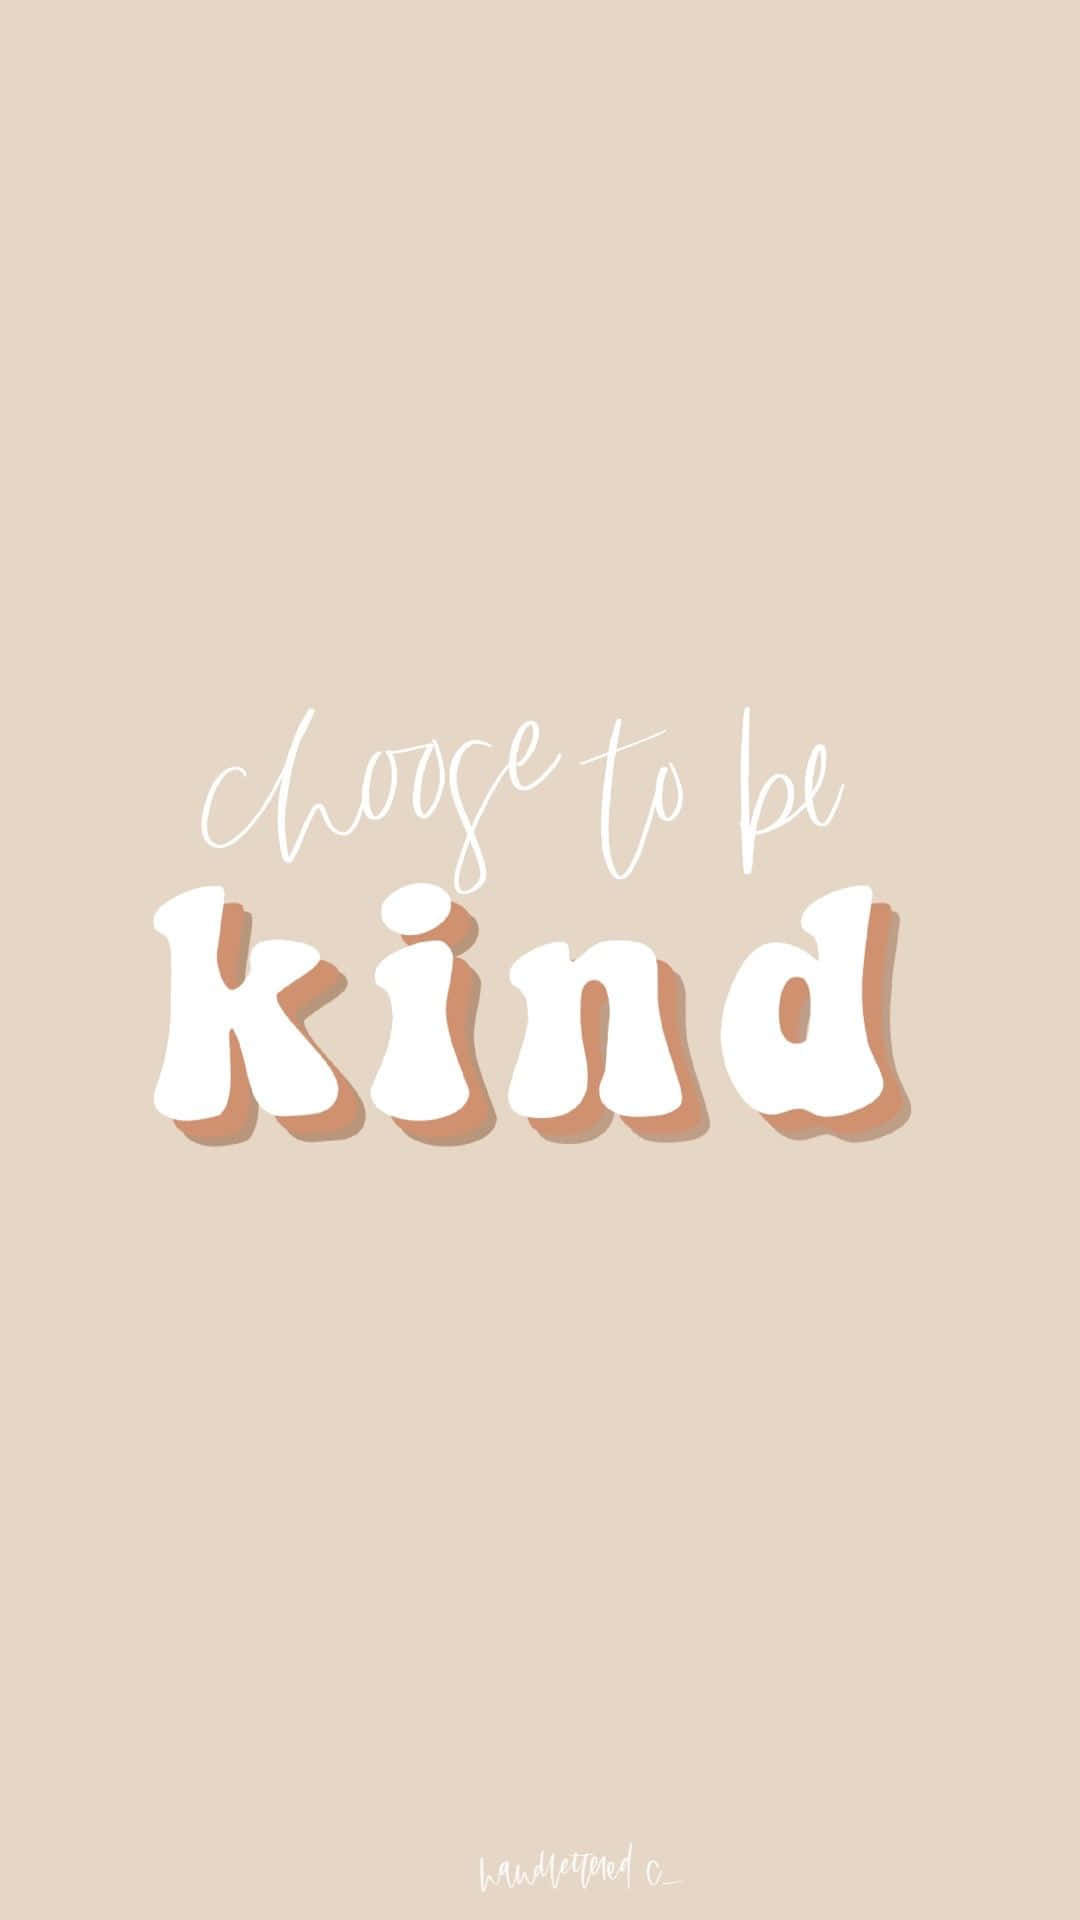 Be Kind Word Tiles Facebook Cover Photo